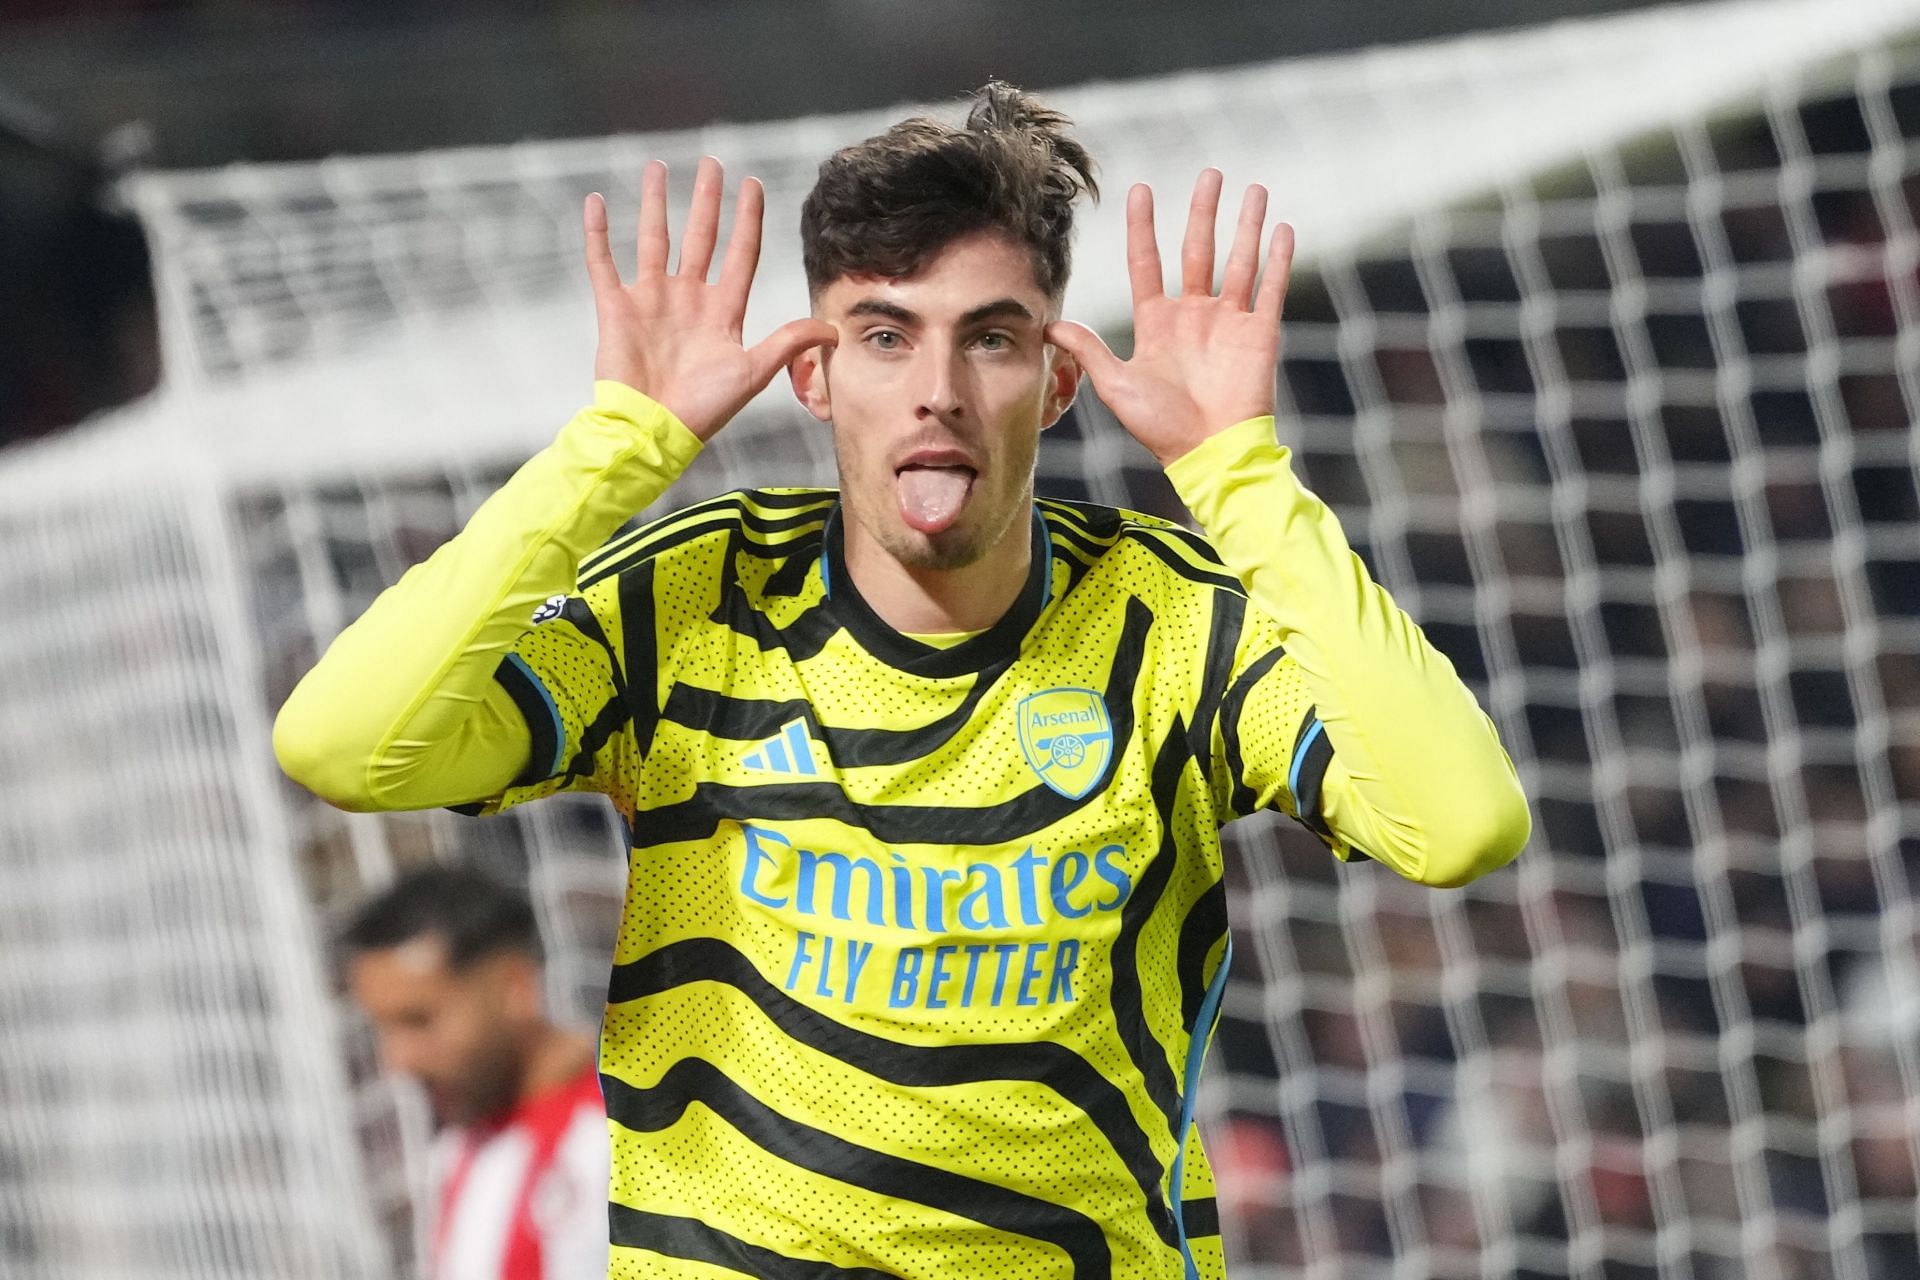 Kai Havertz was the matchwinner for Arsenal in this game.